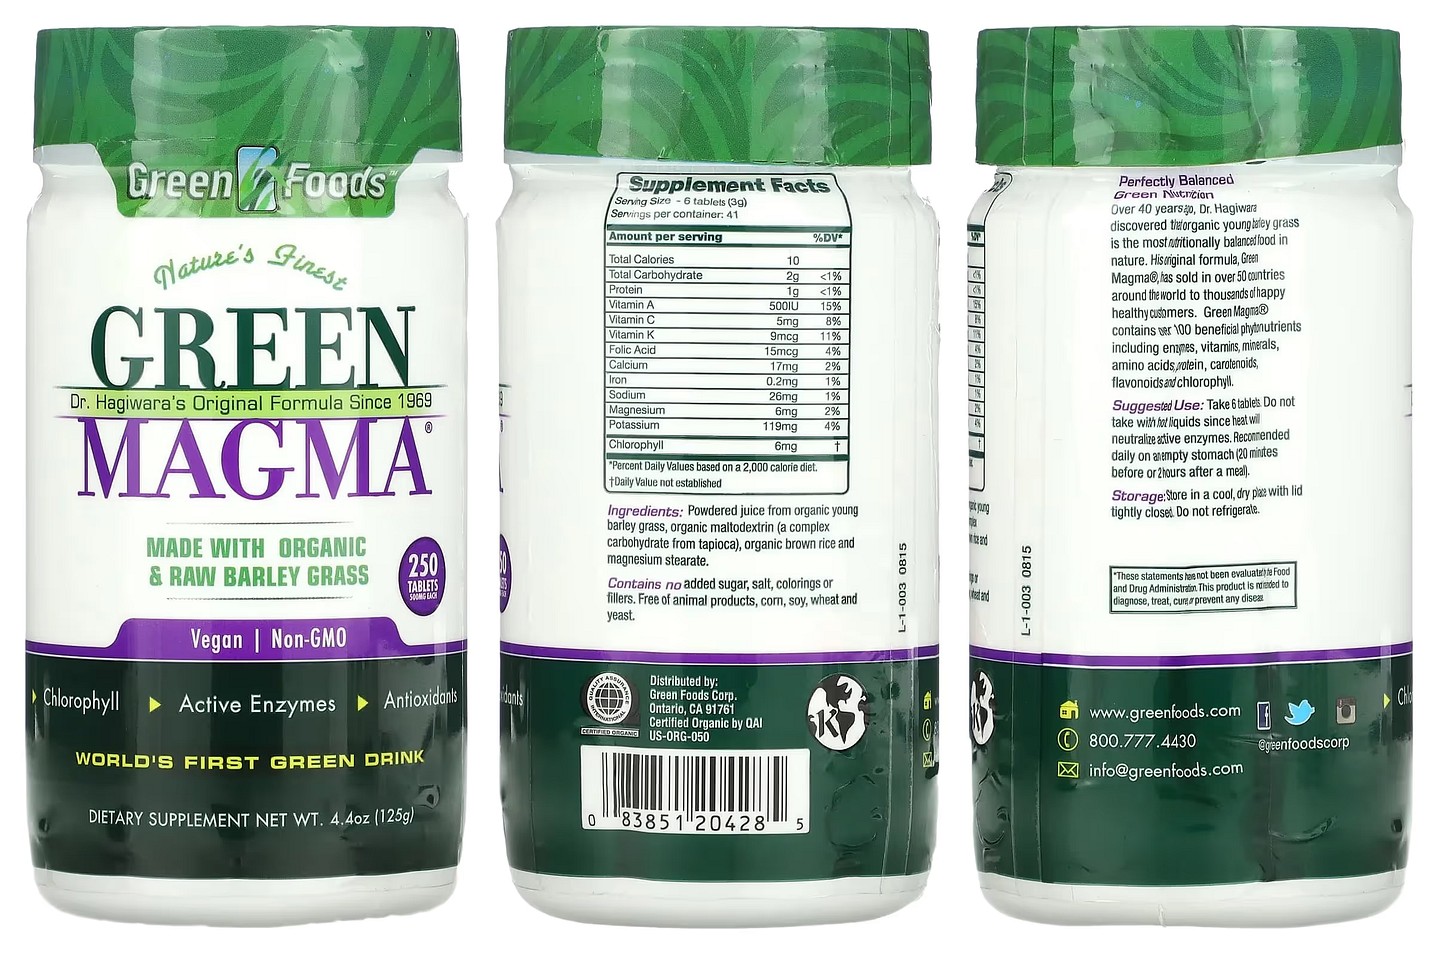 Green Foods, Green Magma packaging